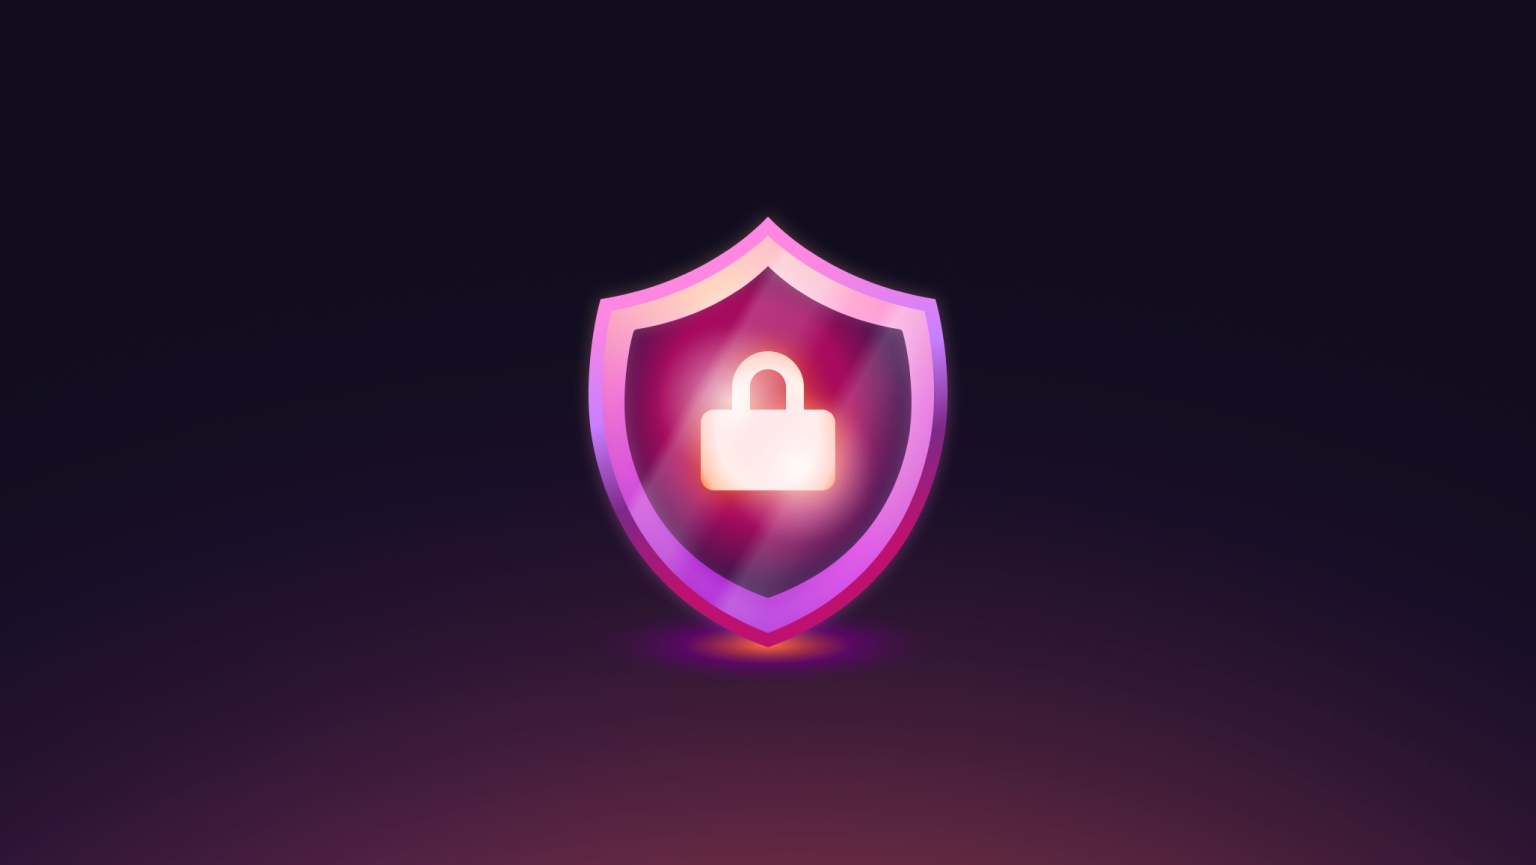 A purple shield with a lock in the middle, set against a dark purple gradient background